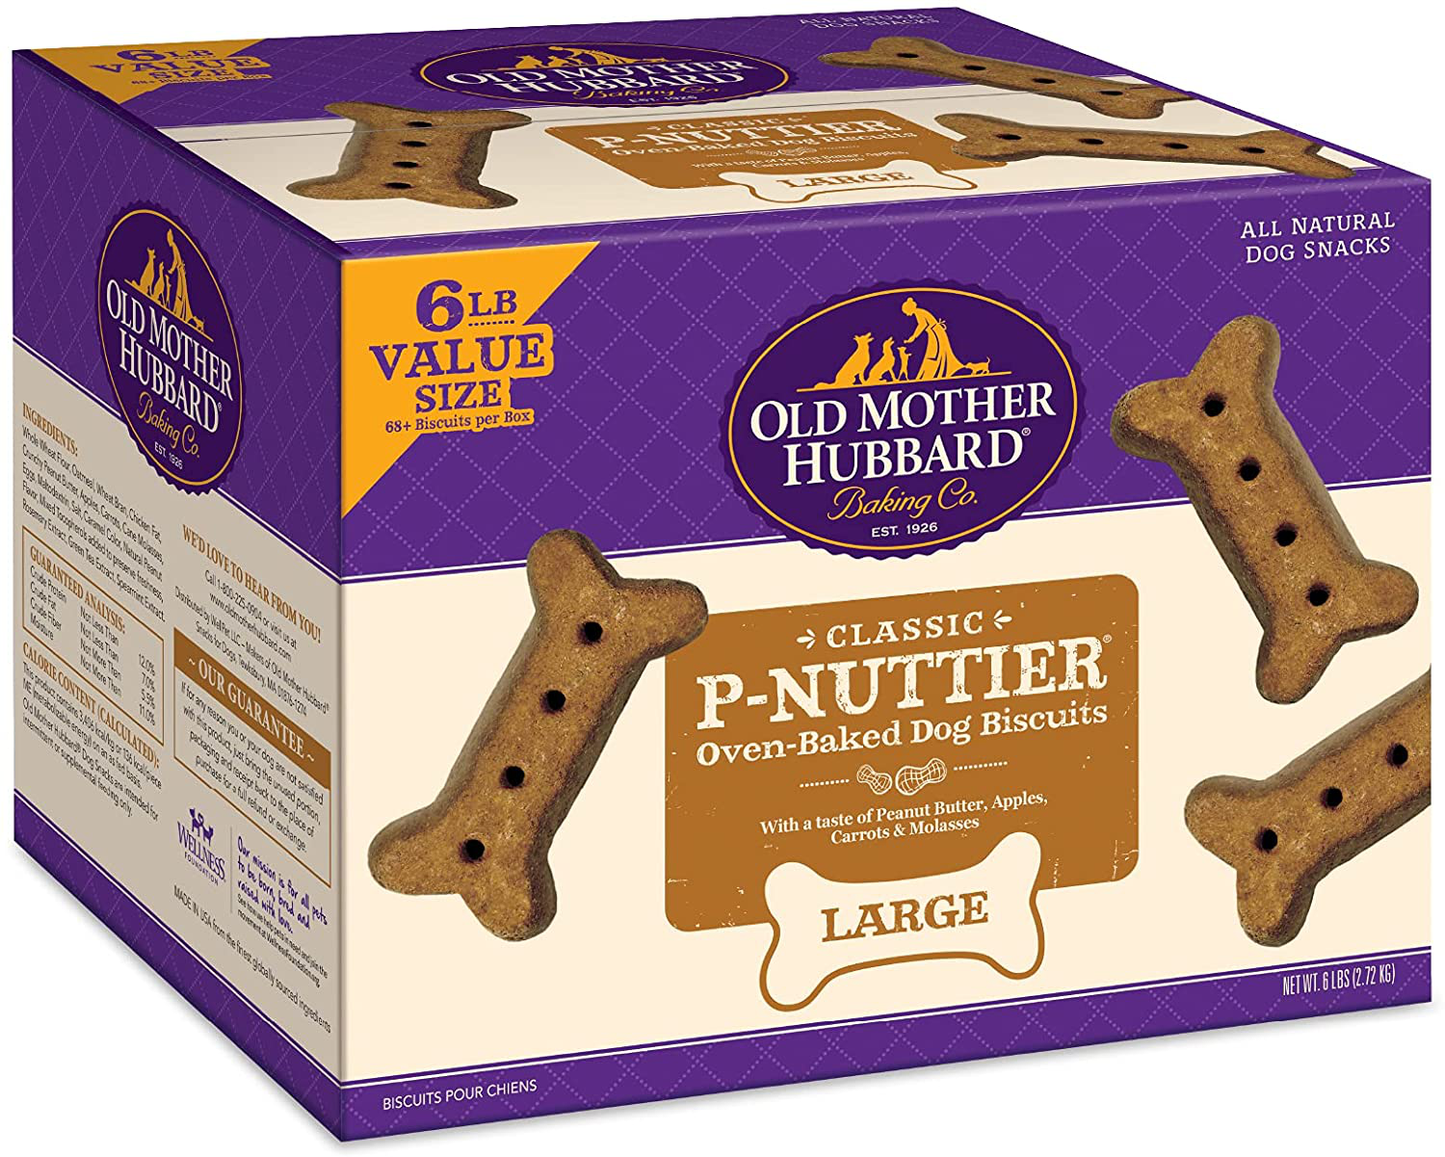 Old Mother Hubbard Classic P-Nuttier Peanut Butter Dog Treats, Oven Baked Crunchy Treats for Large Dogs, Natural, Healthy, Training Treats Animals & Pet Supplies > Pet Supplies > Dog Supplies > Dog Treats Old Mother Hubbard 6 Pound Box (Pack of 1)  